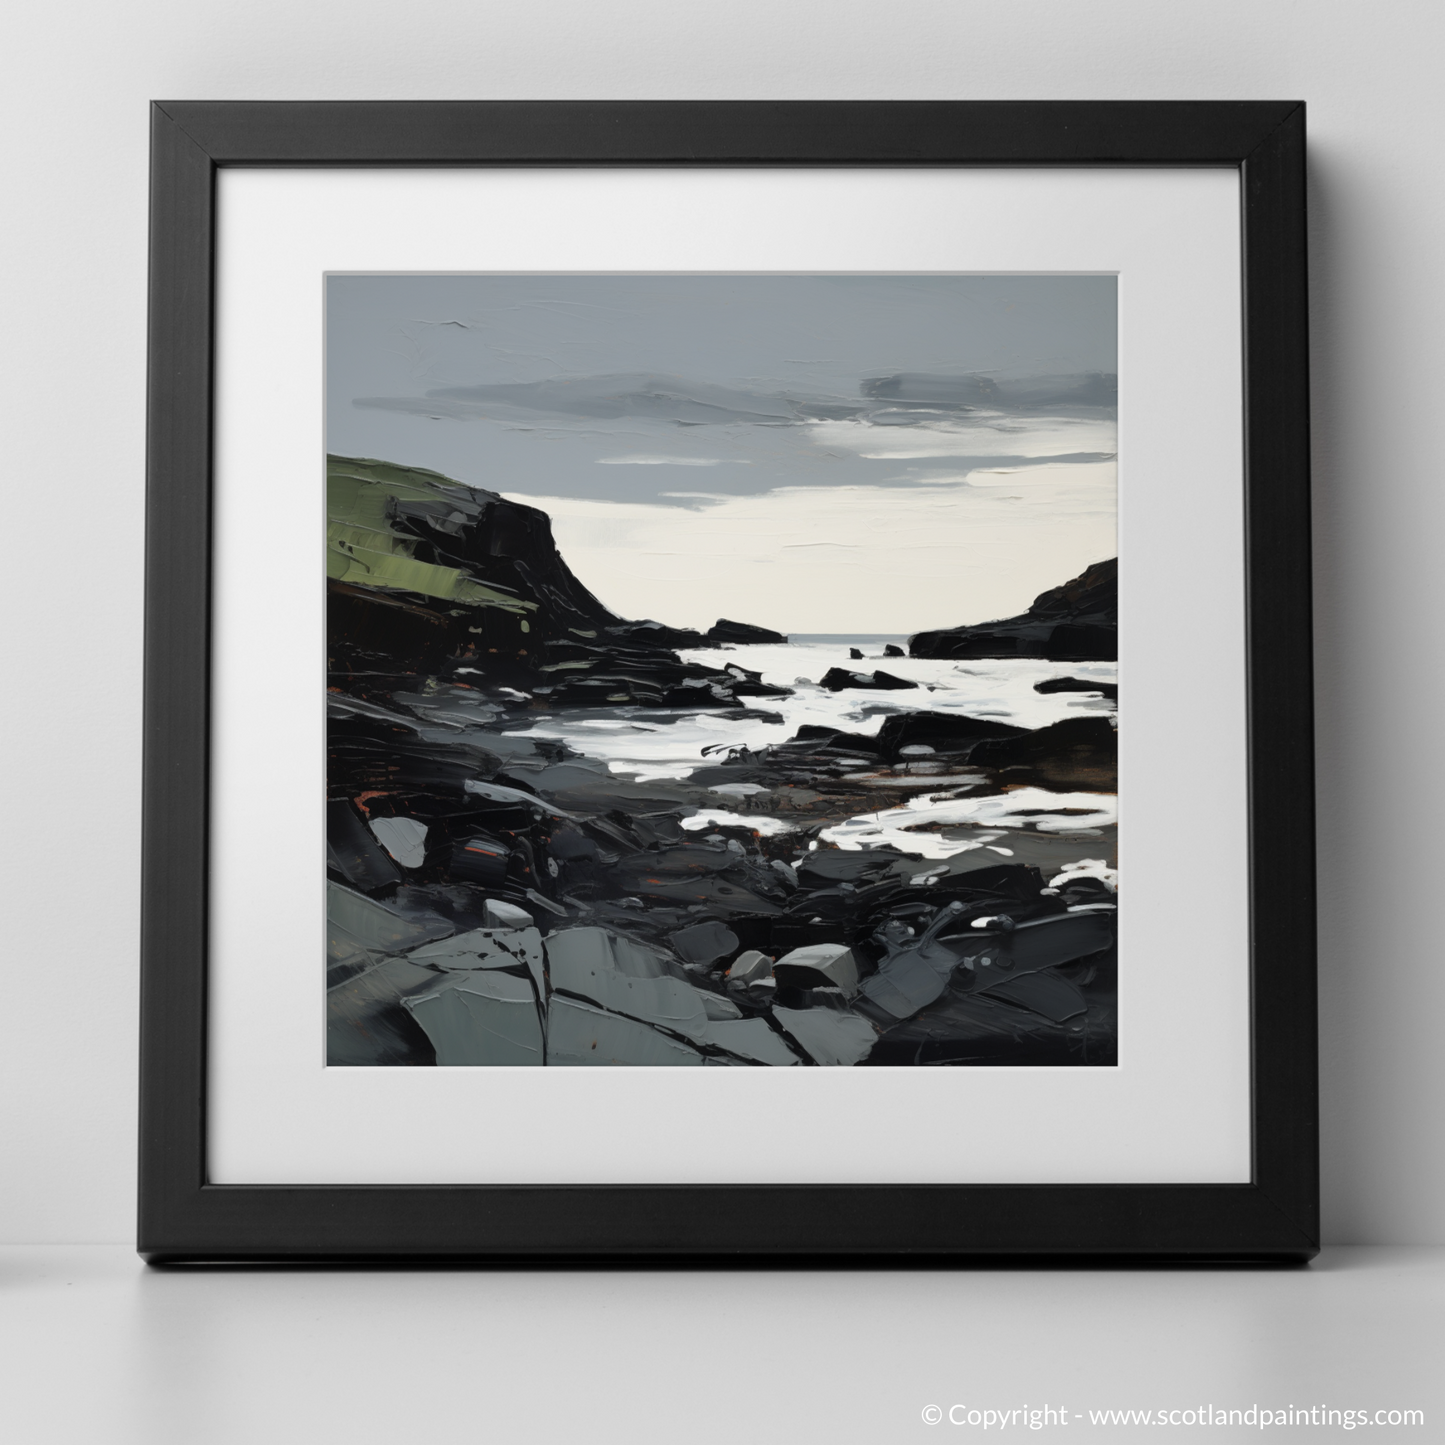 Art Print of Catterline Bay, Aberdeenshire with a black frame